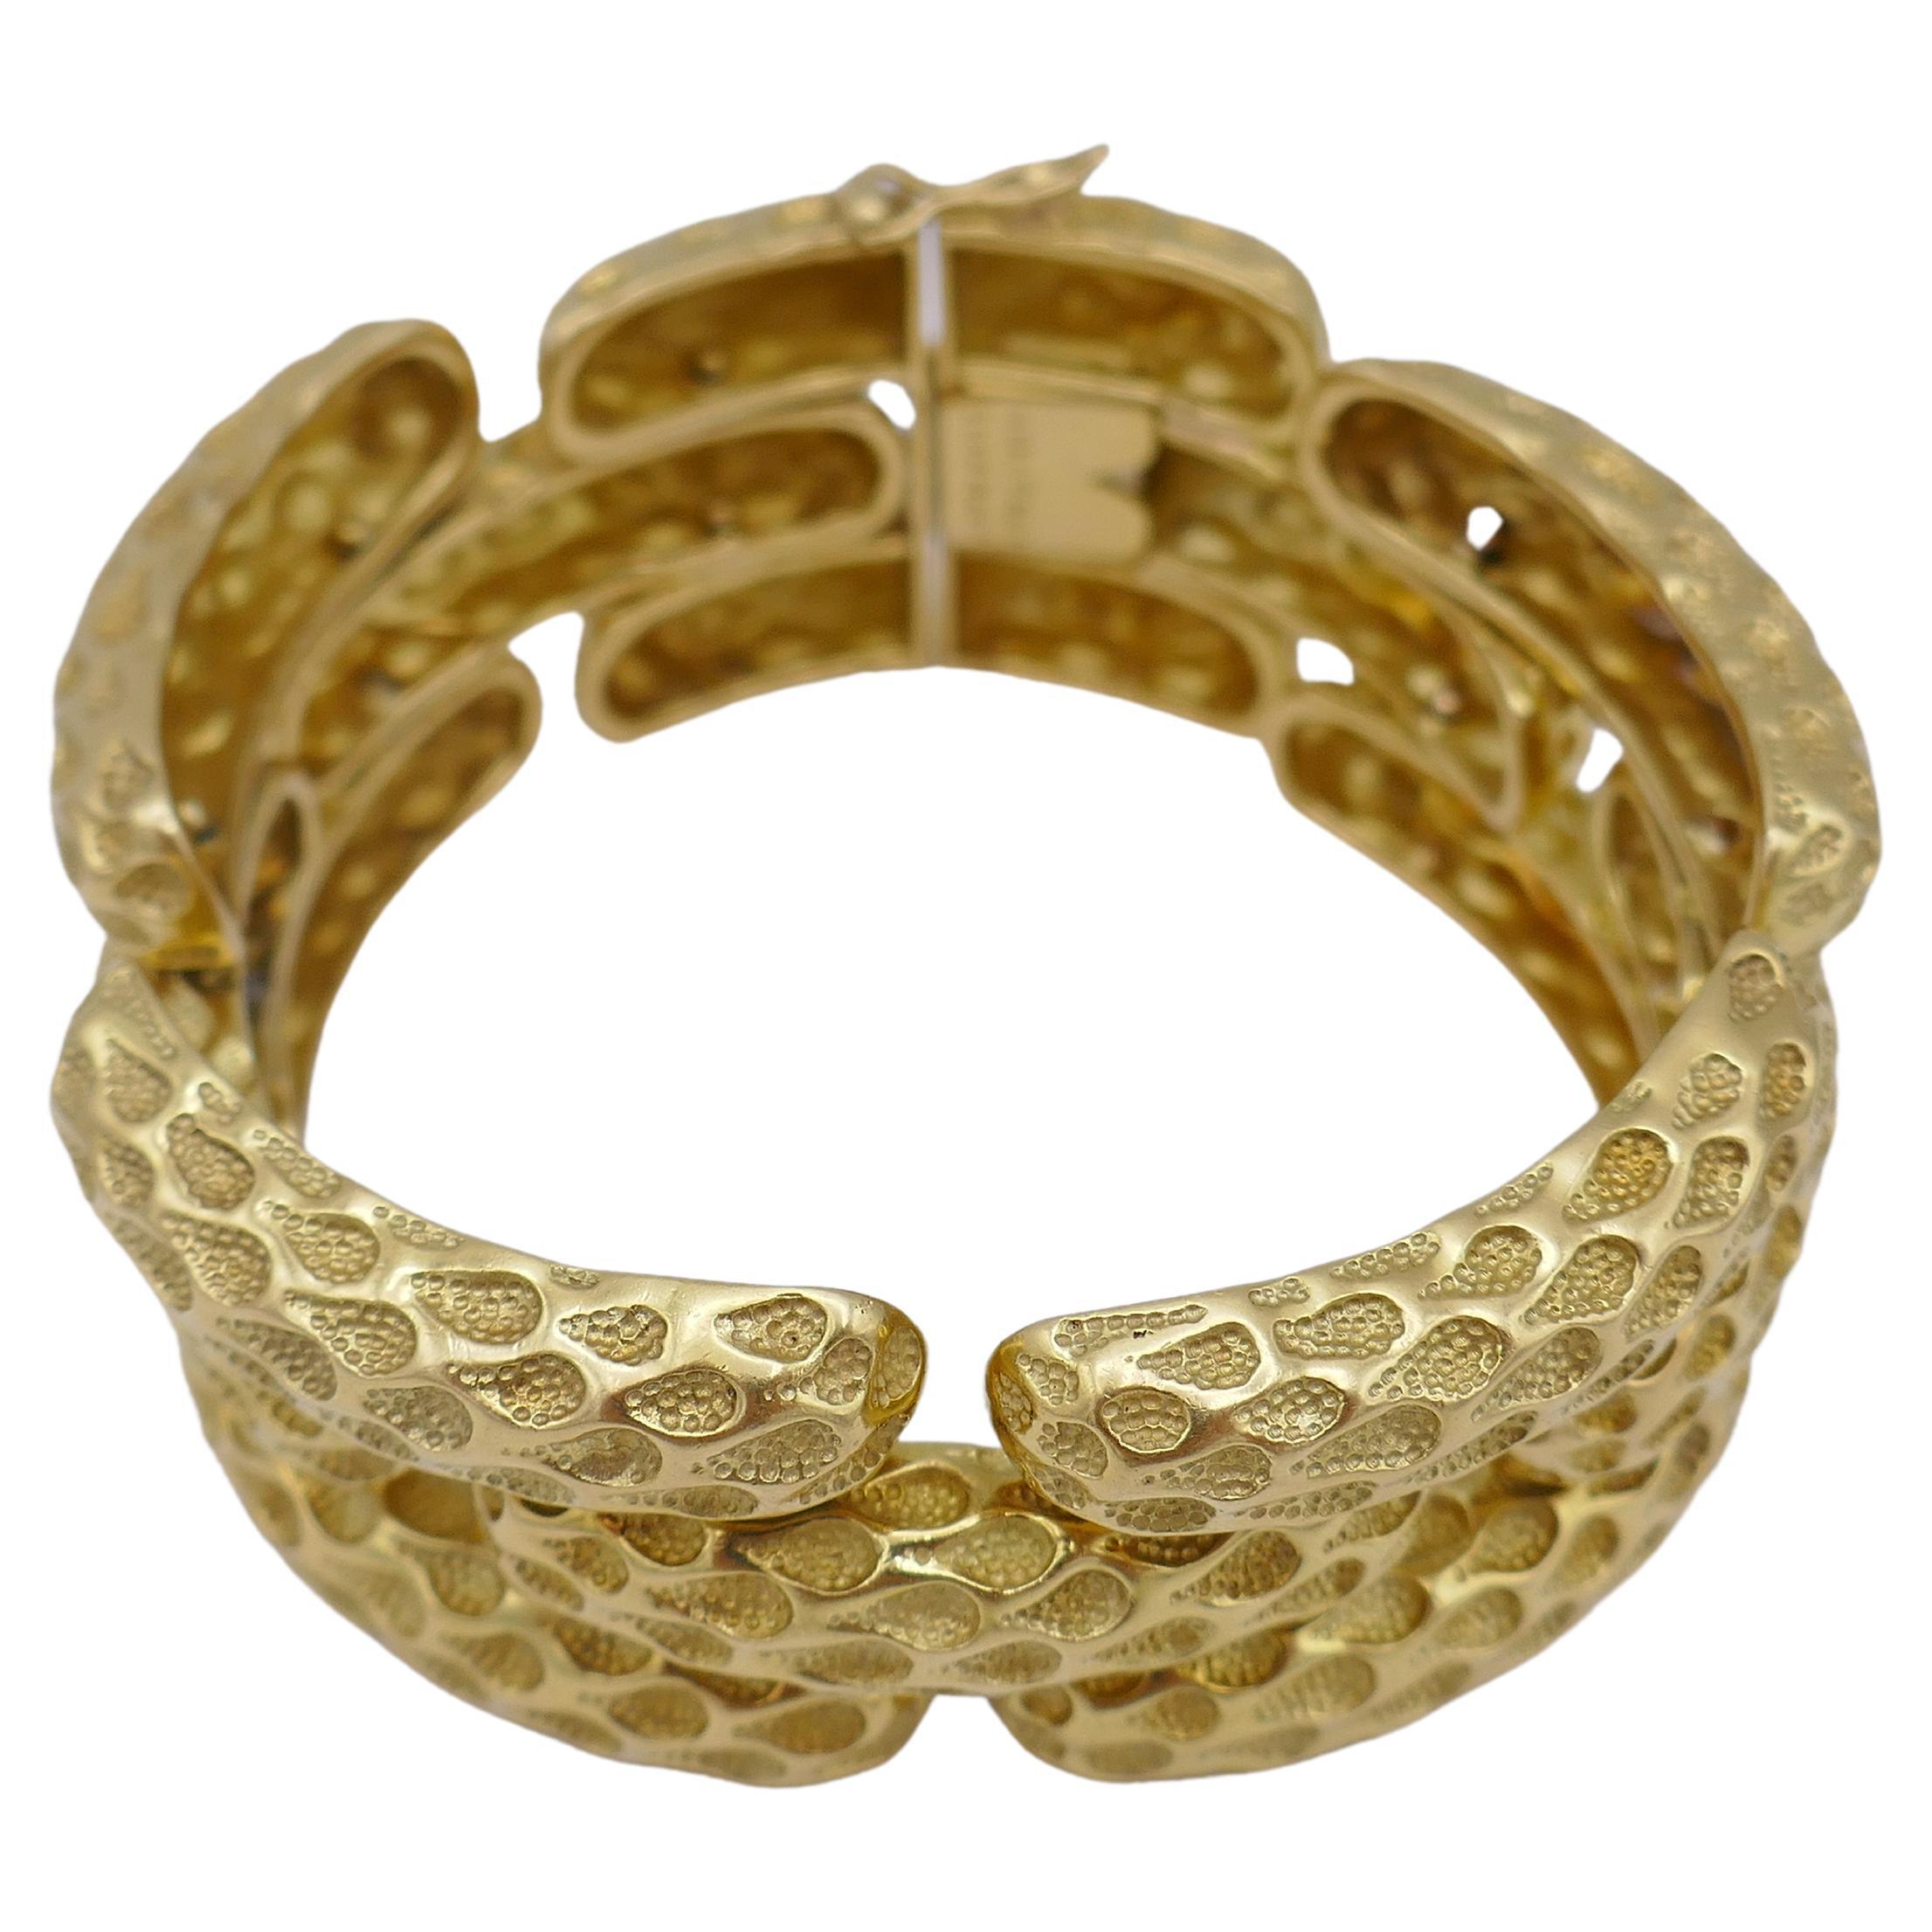 An amazing Tiffany & Co. bracelet made of 18k gold. Features a perfectly done hammered snake skin motif.
The bracelet is consisted of the gold oval parts that are spherically bent in a shape of a wrist. There are three rows of these parts connected